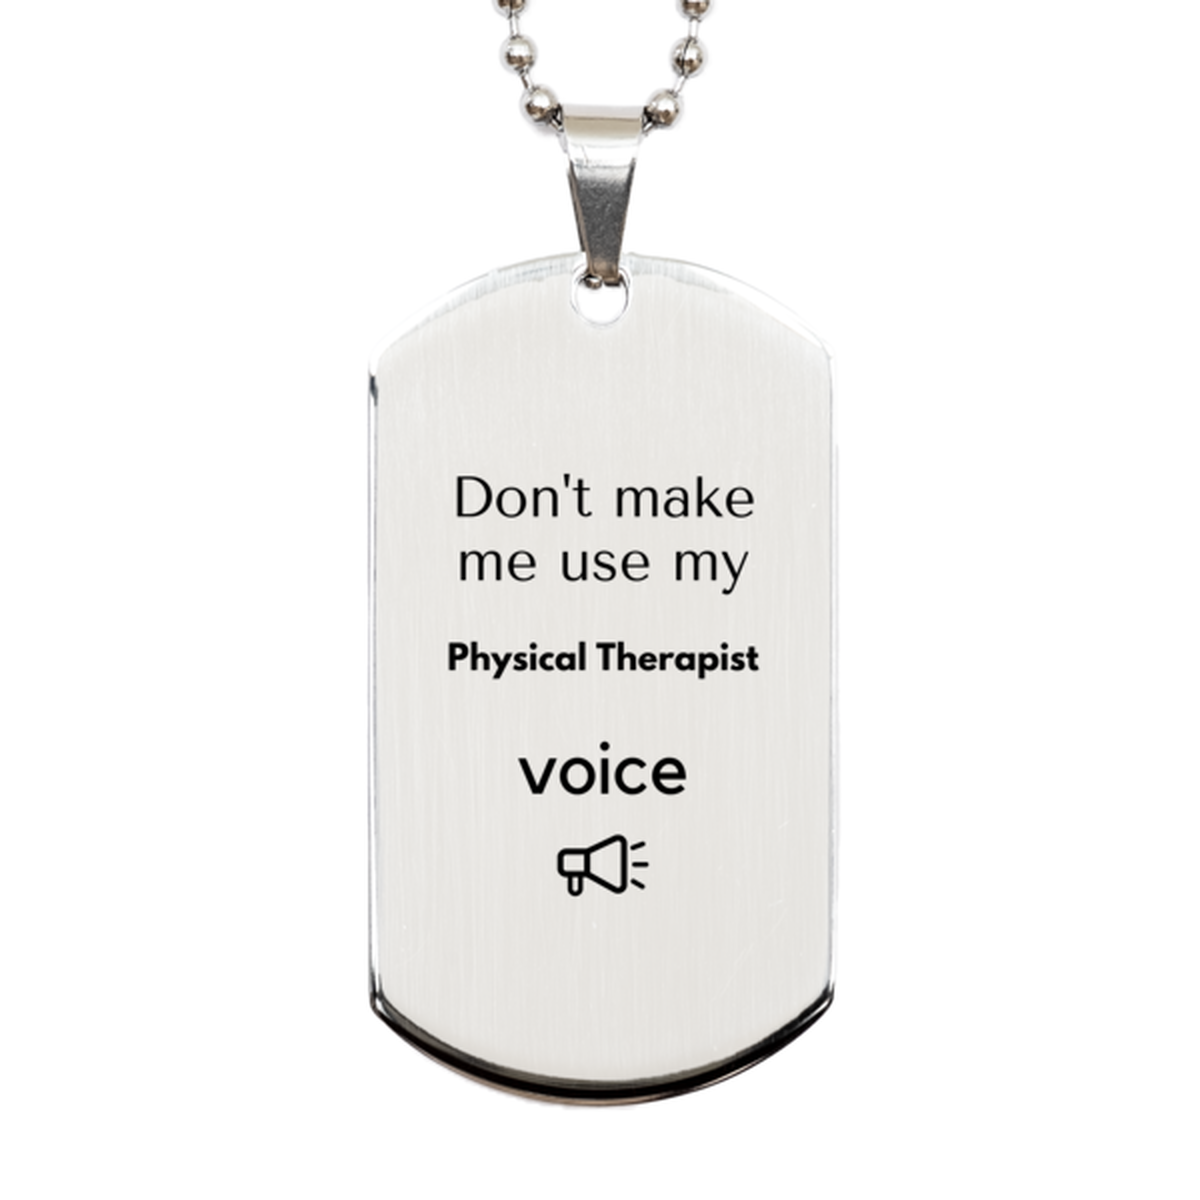 Don't make me use my Physical Therapist voice, Sarcasm Physical Therapist Gifts, Christmas Physical Therapist Silver Dog Tag Birthday Unique Gifts For Physical Therapist Coworkers, Men, Women, Colleague, Friends